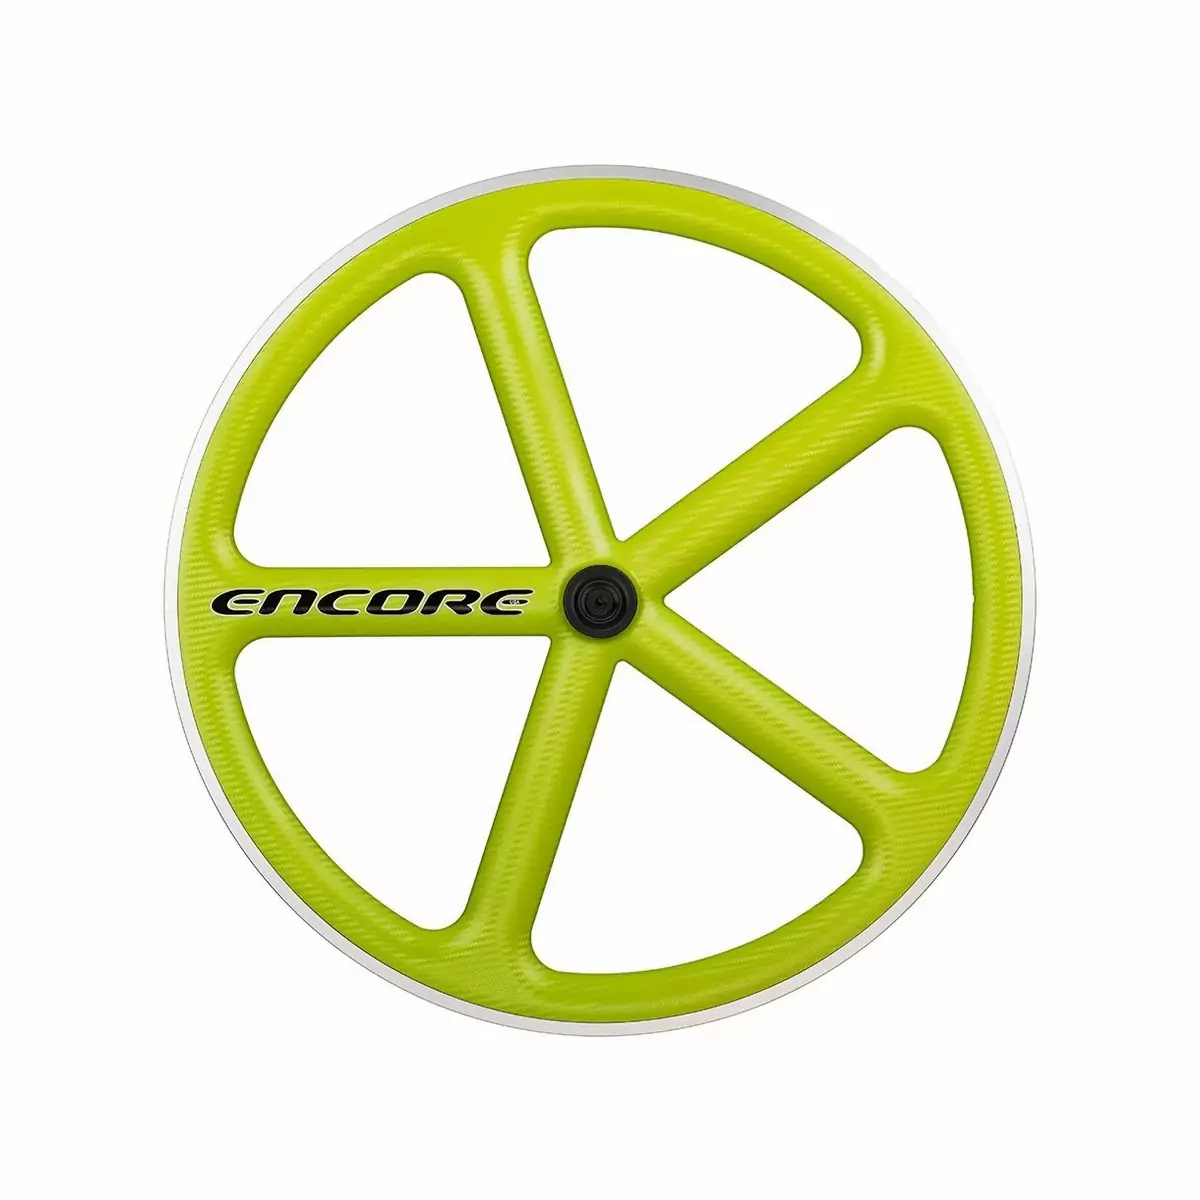 rear wheel 700c track 5 spokes carbon weave lime msw - image